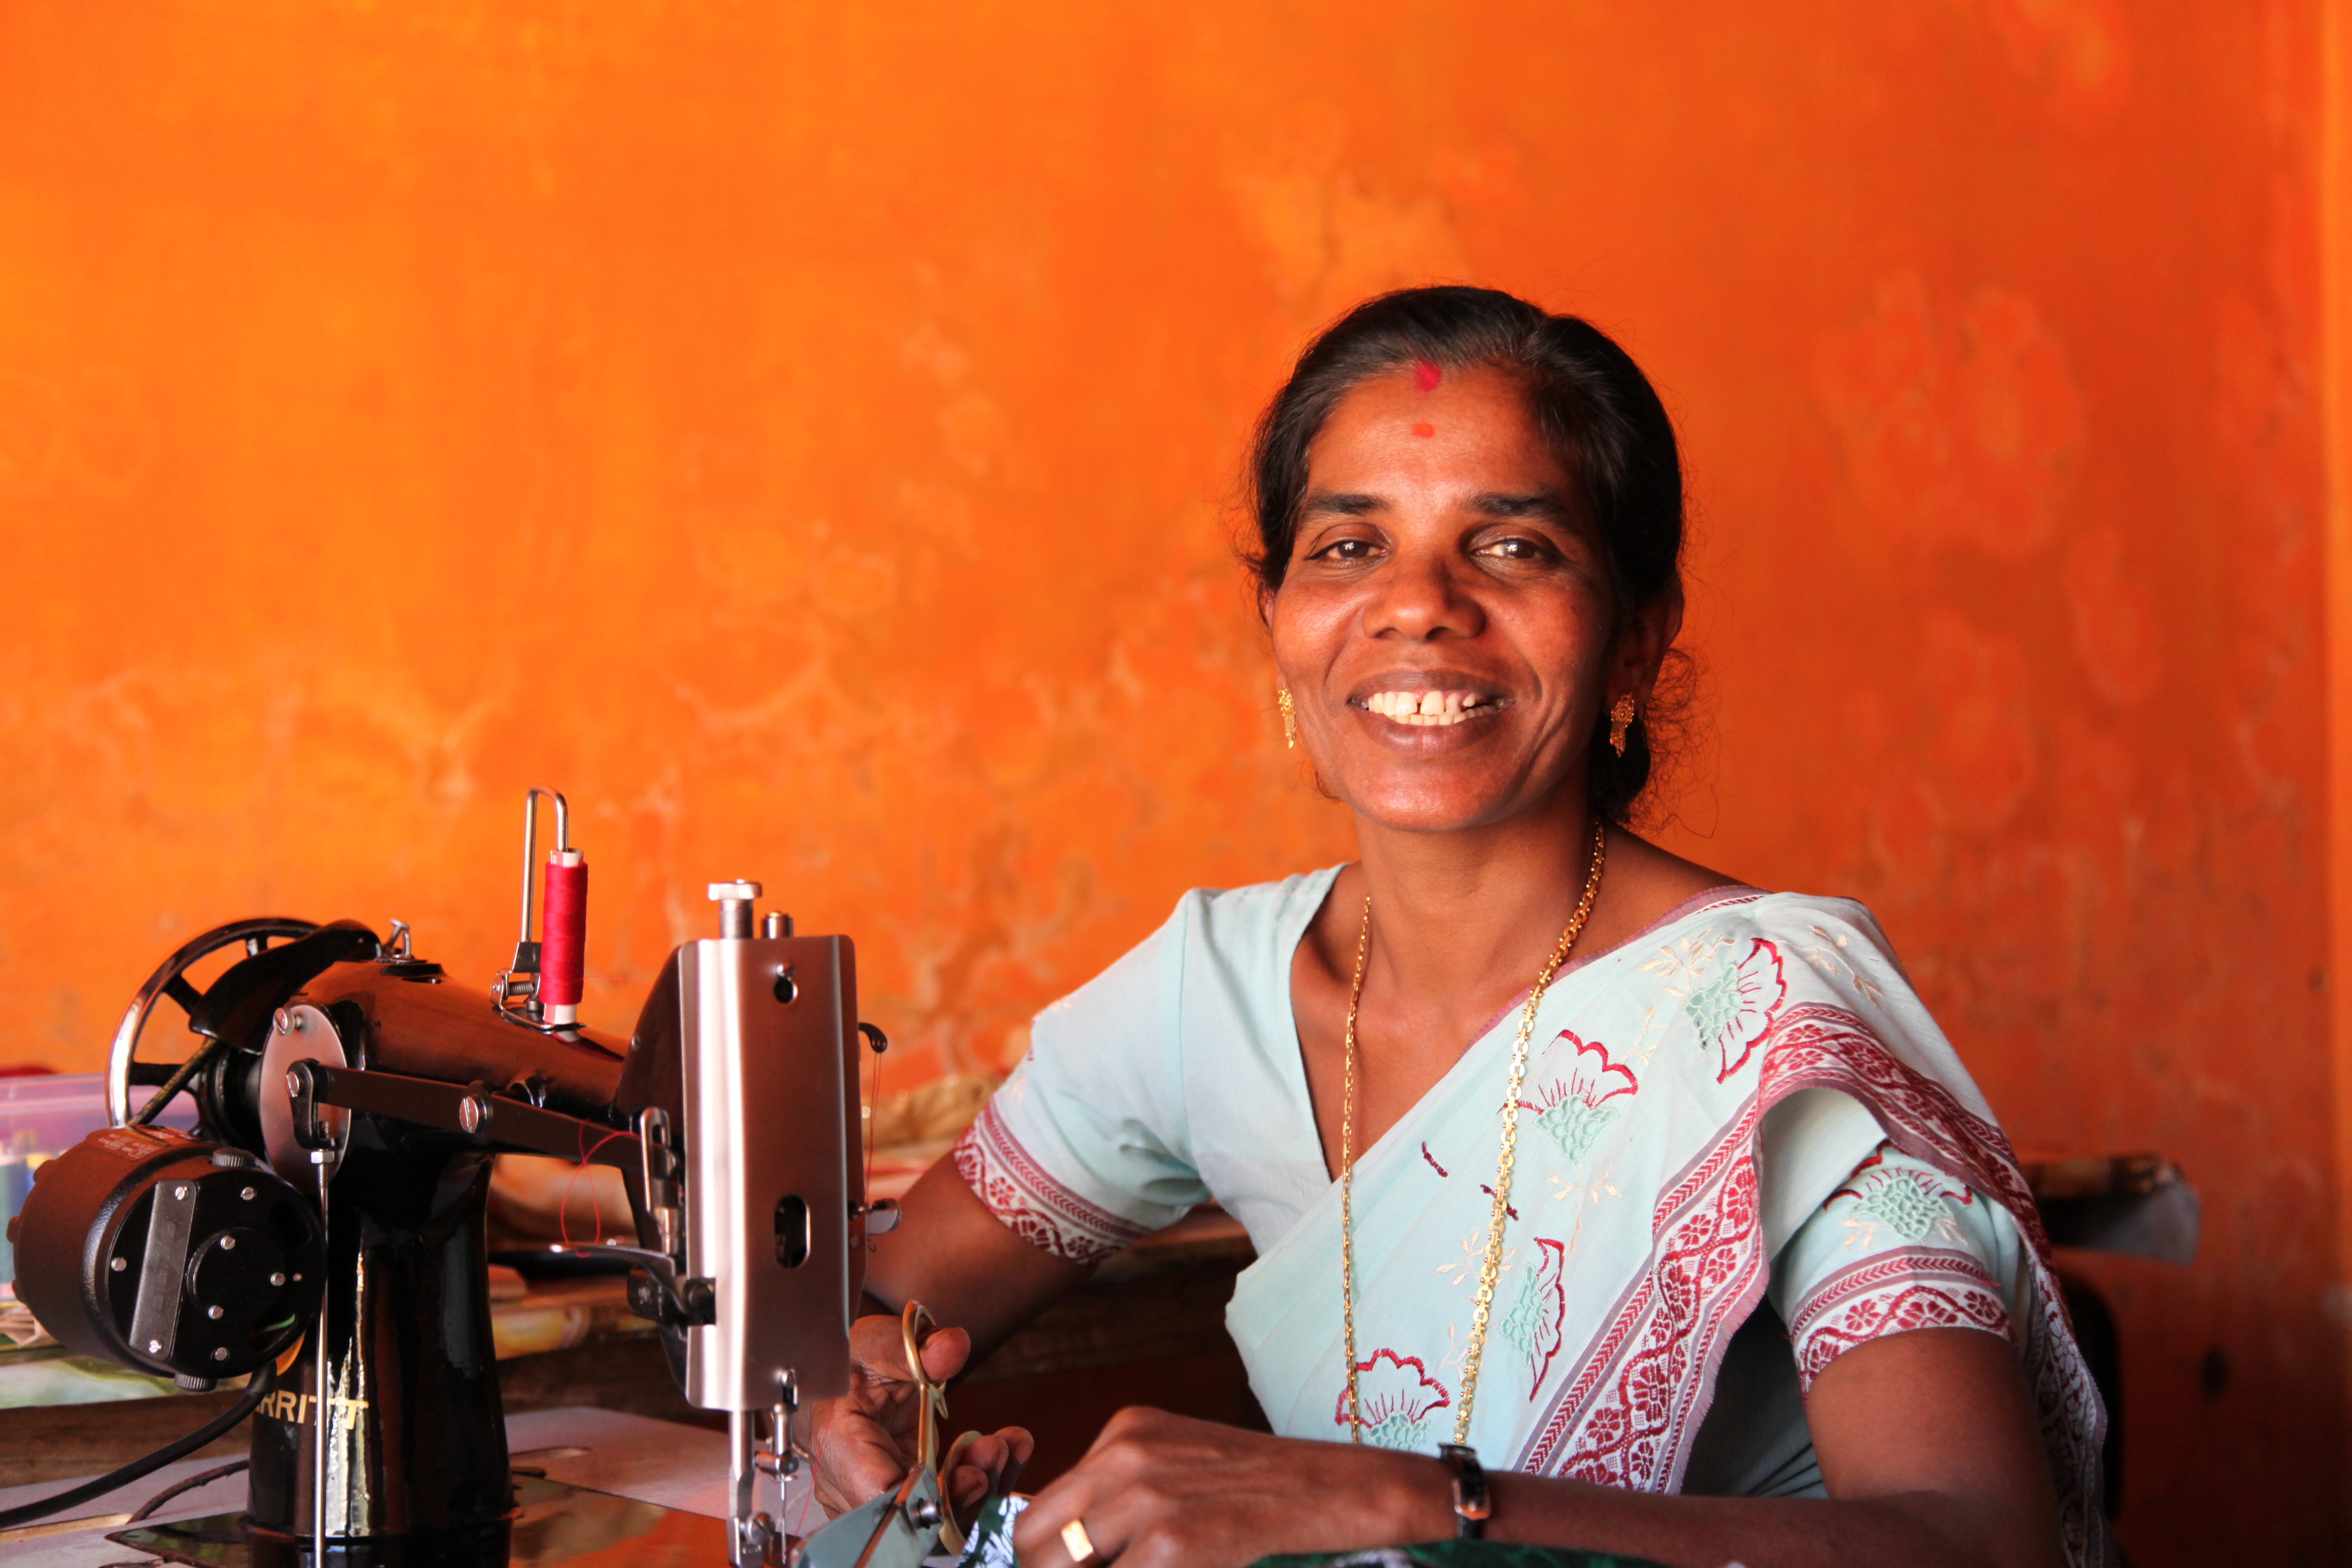 Sujata at her sewing machine in India